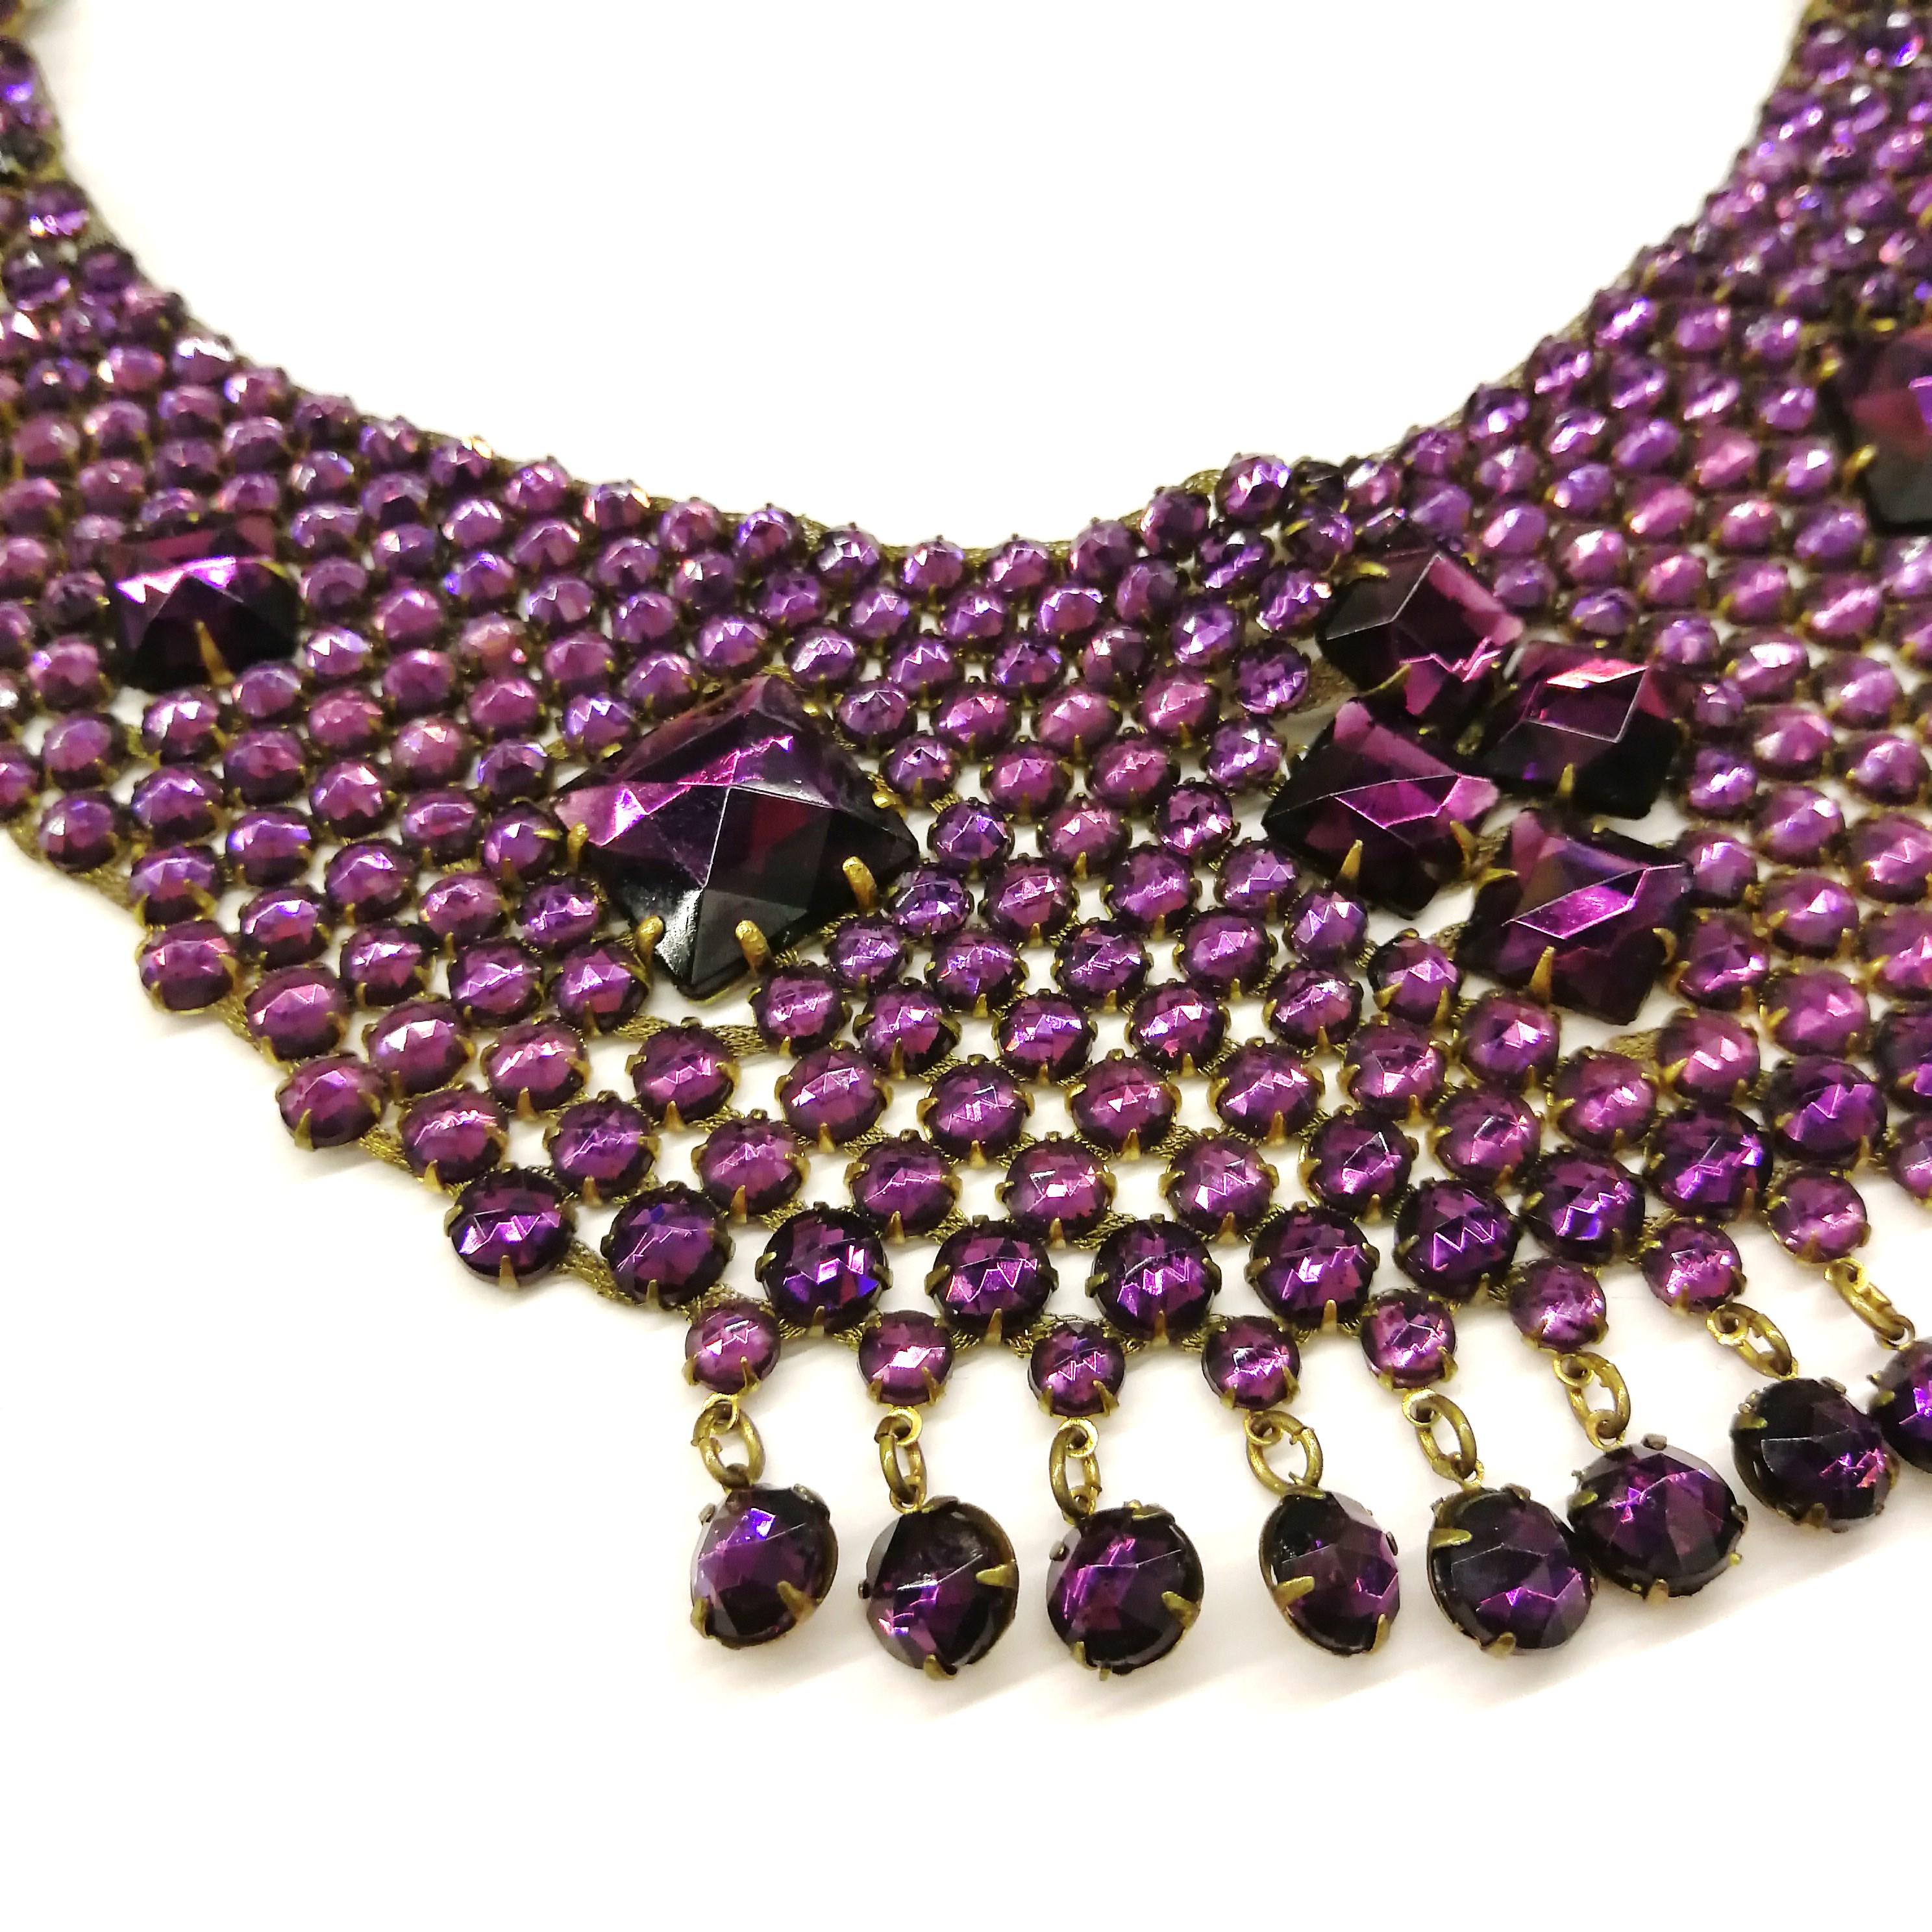 A very rare and wonderful necklace, set in a soft gilt metal, with amethyst glass faceted cabuchons set all over, interspersed with square cut large cabuchons, placed at intervals throughout, and a small fringe of claw set cabuchons along the bottom